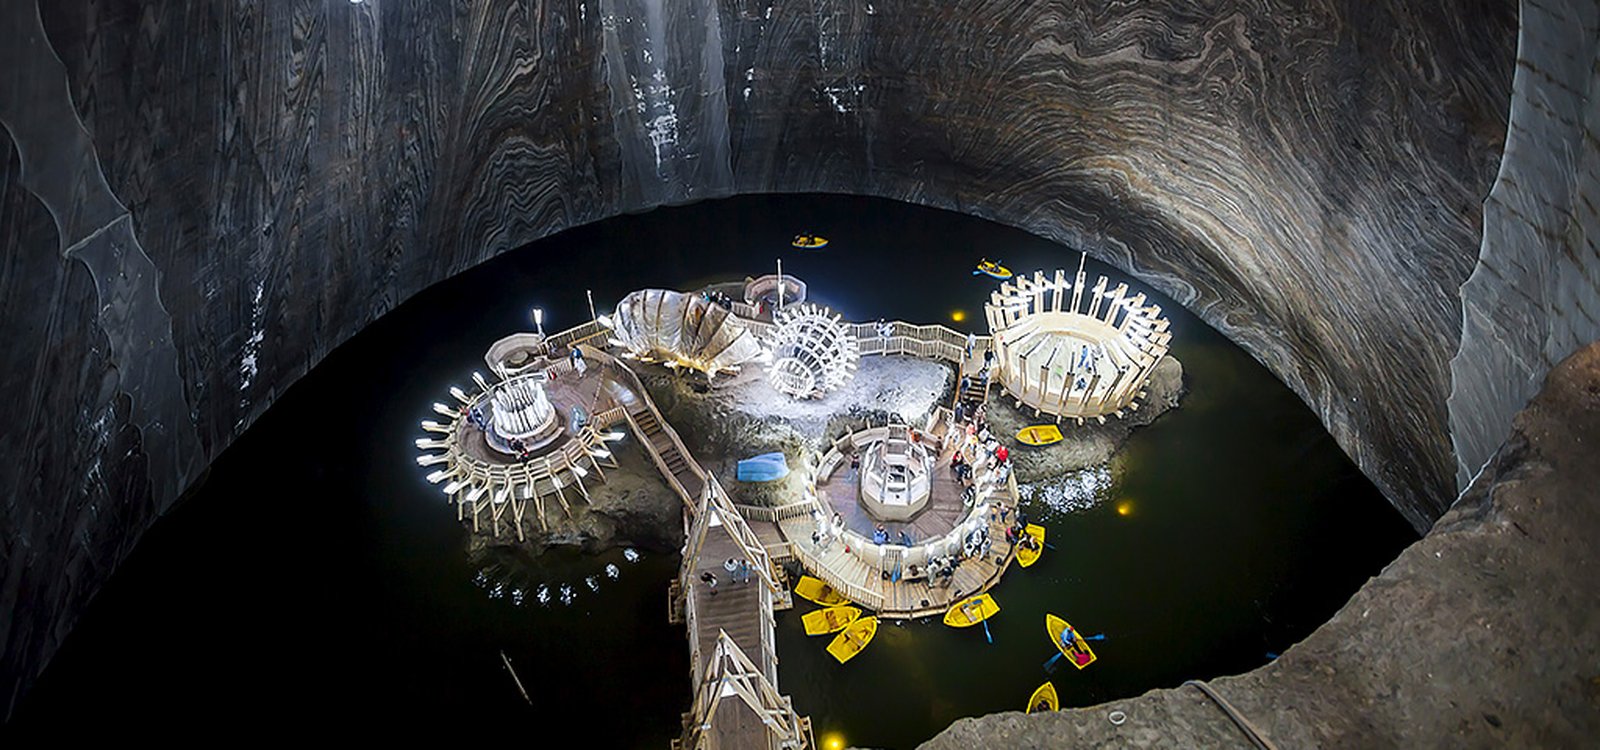 <p>Inside the Salina Turda salt mine in  Romania there is an underground lake that visitors can tour in rowboats.</p>
